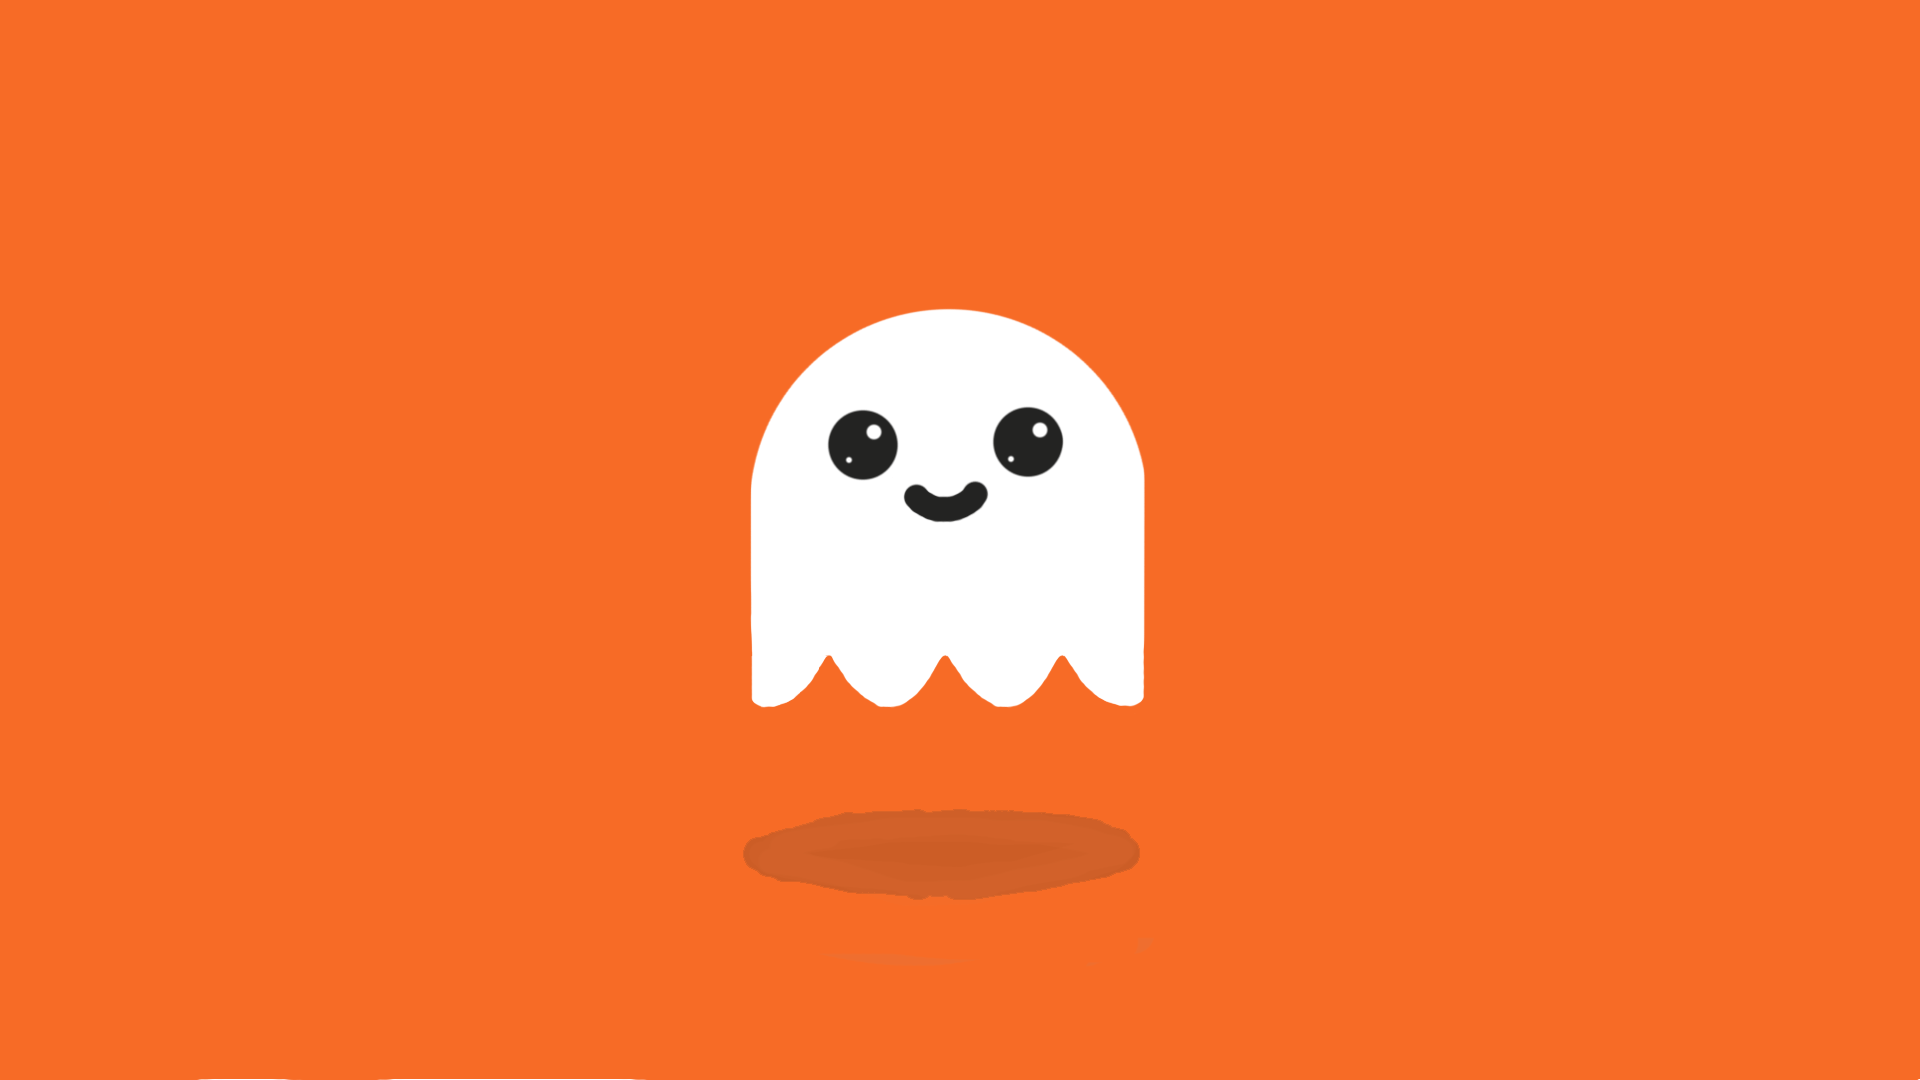 HARRY VINCENT  Projects  Spooktober  Dribbble